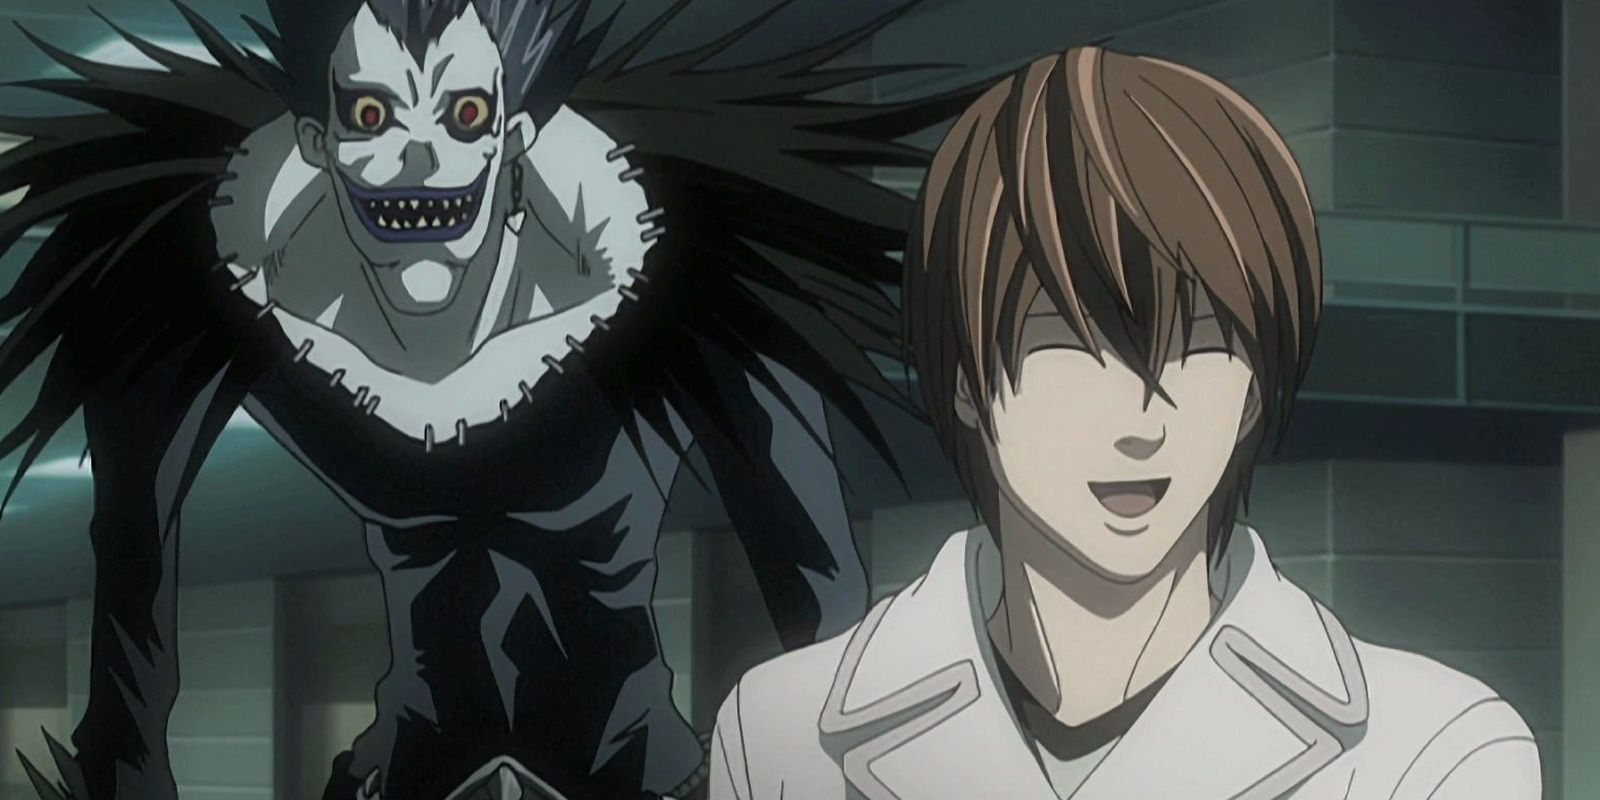 Ryuk and Light in Death Note